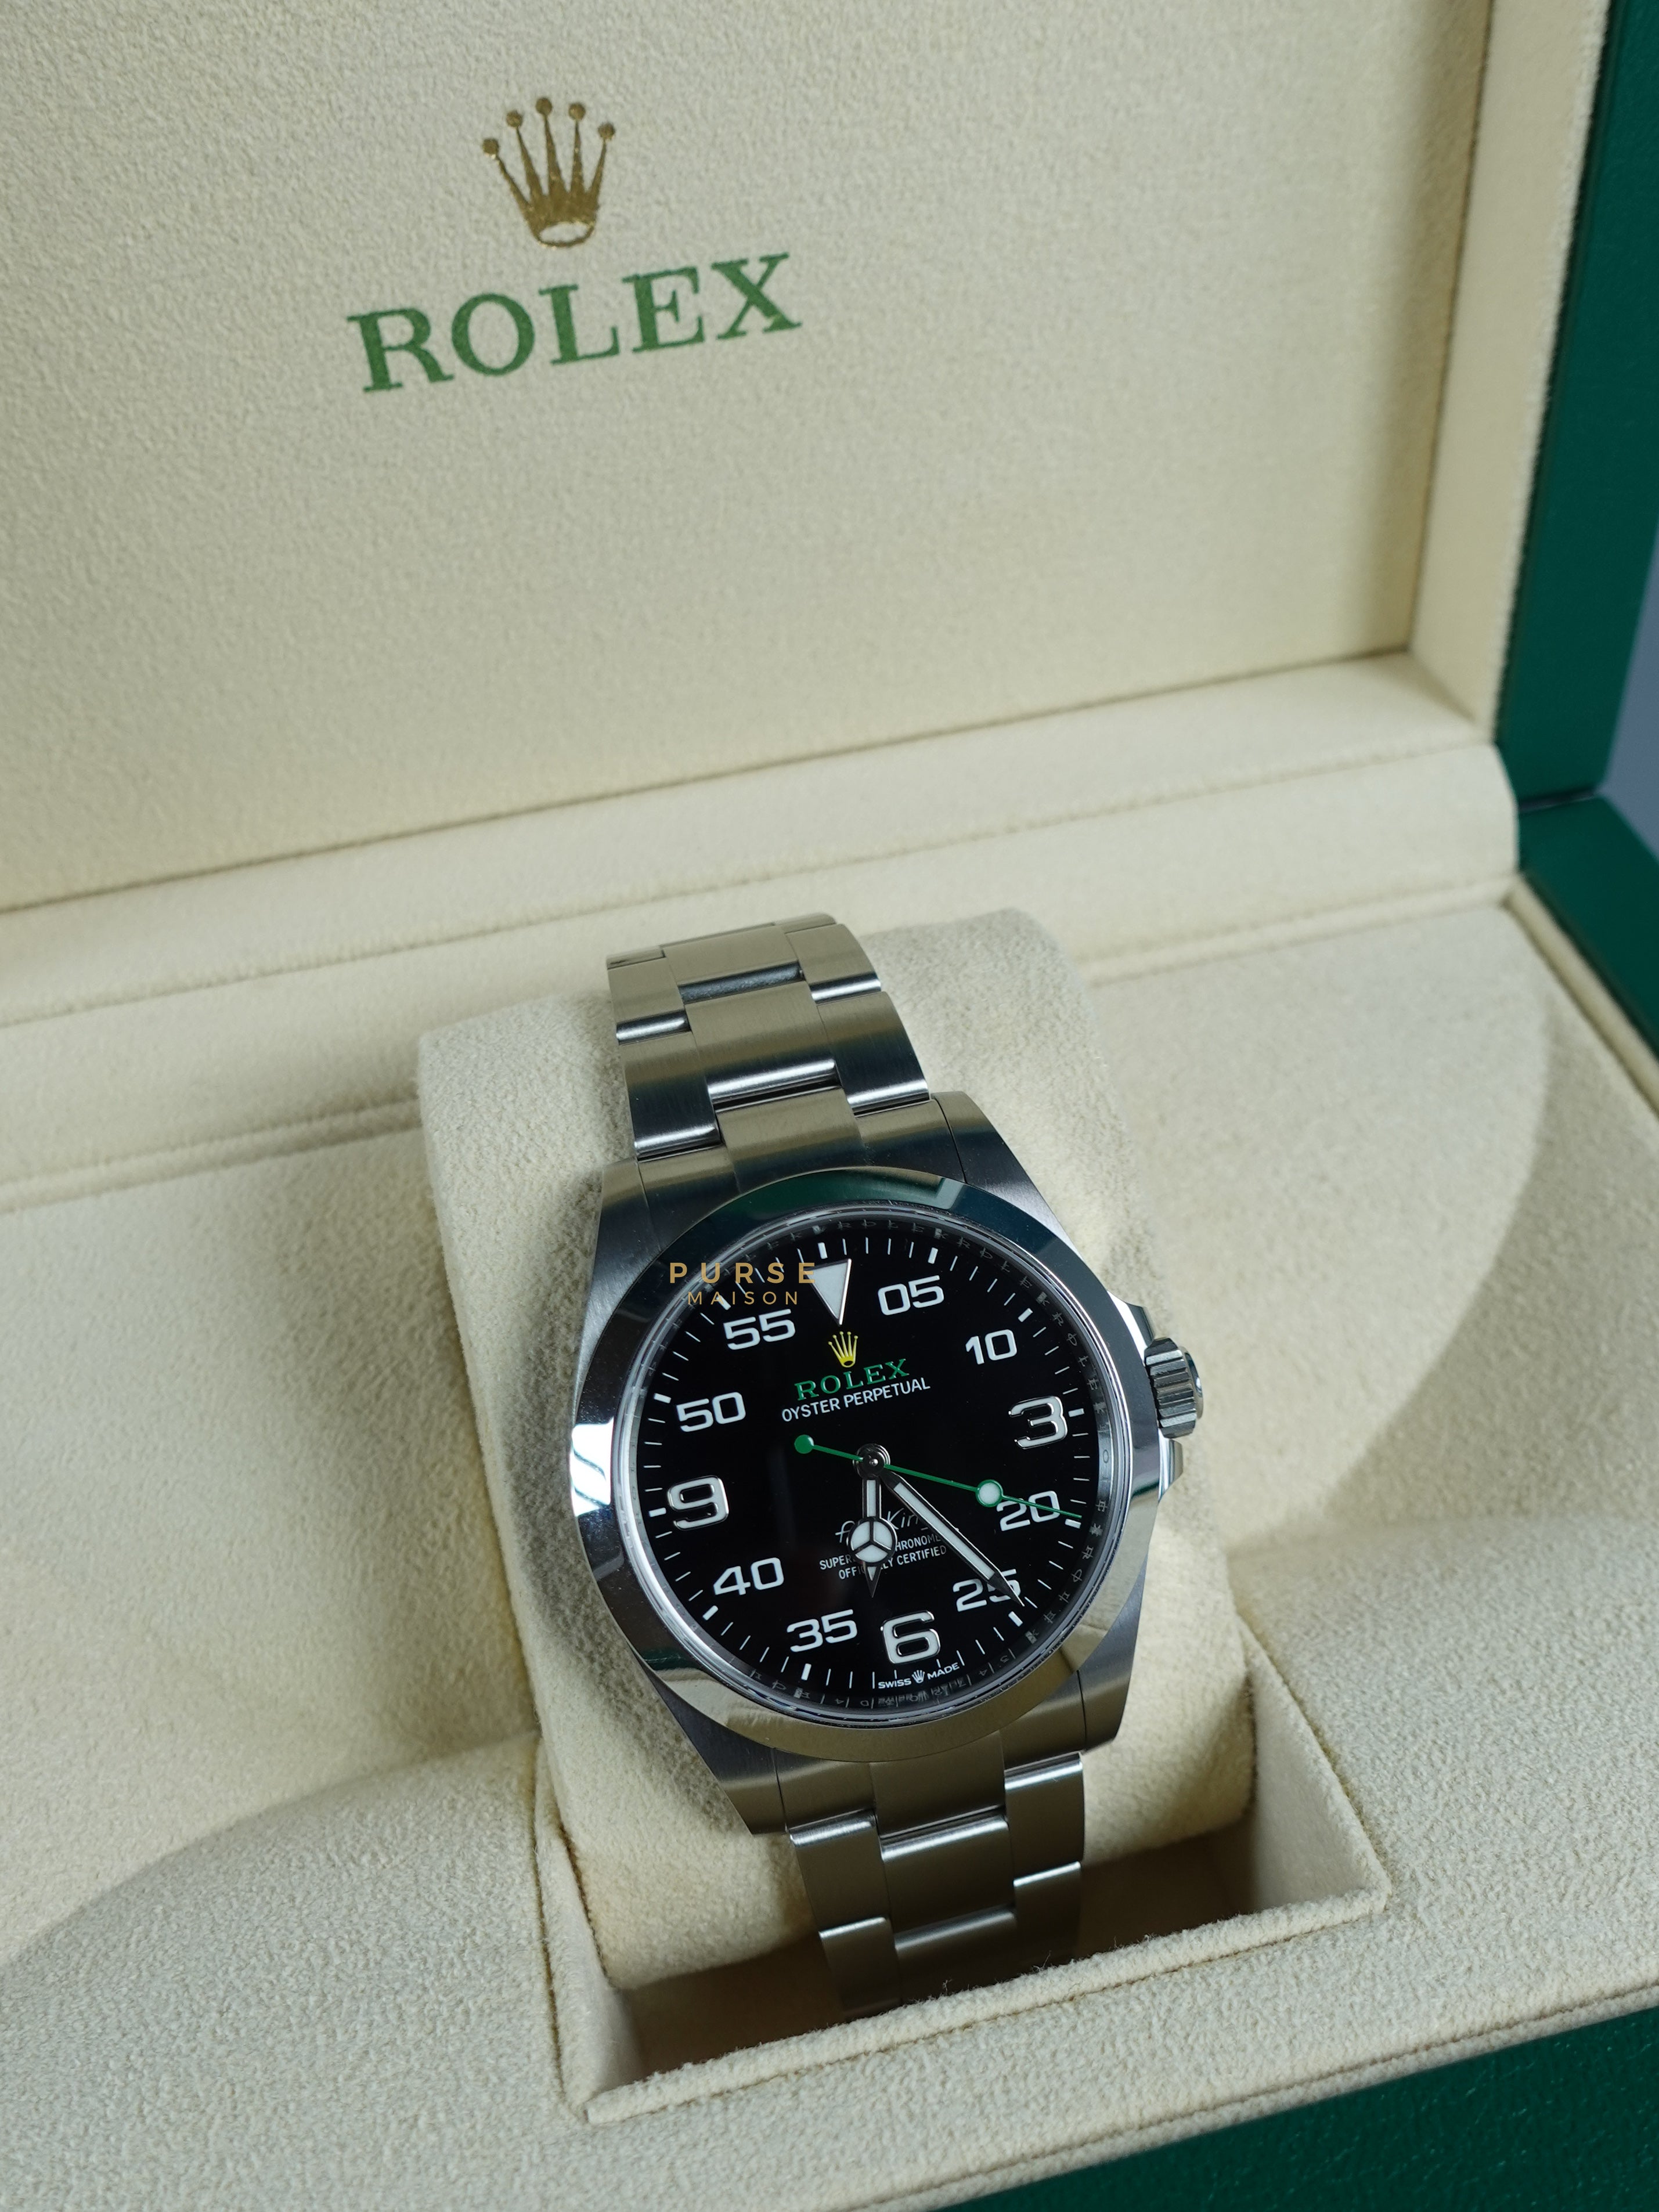 Rolex Air King Oyster Perpetual Watch | Purse Maison Luxury Bags Shop